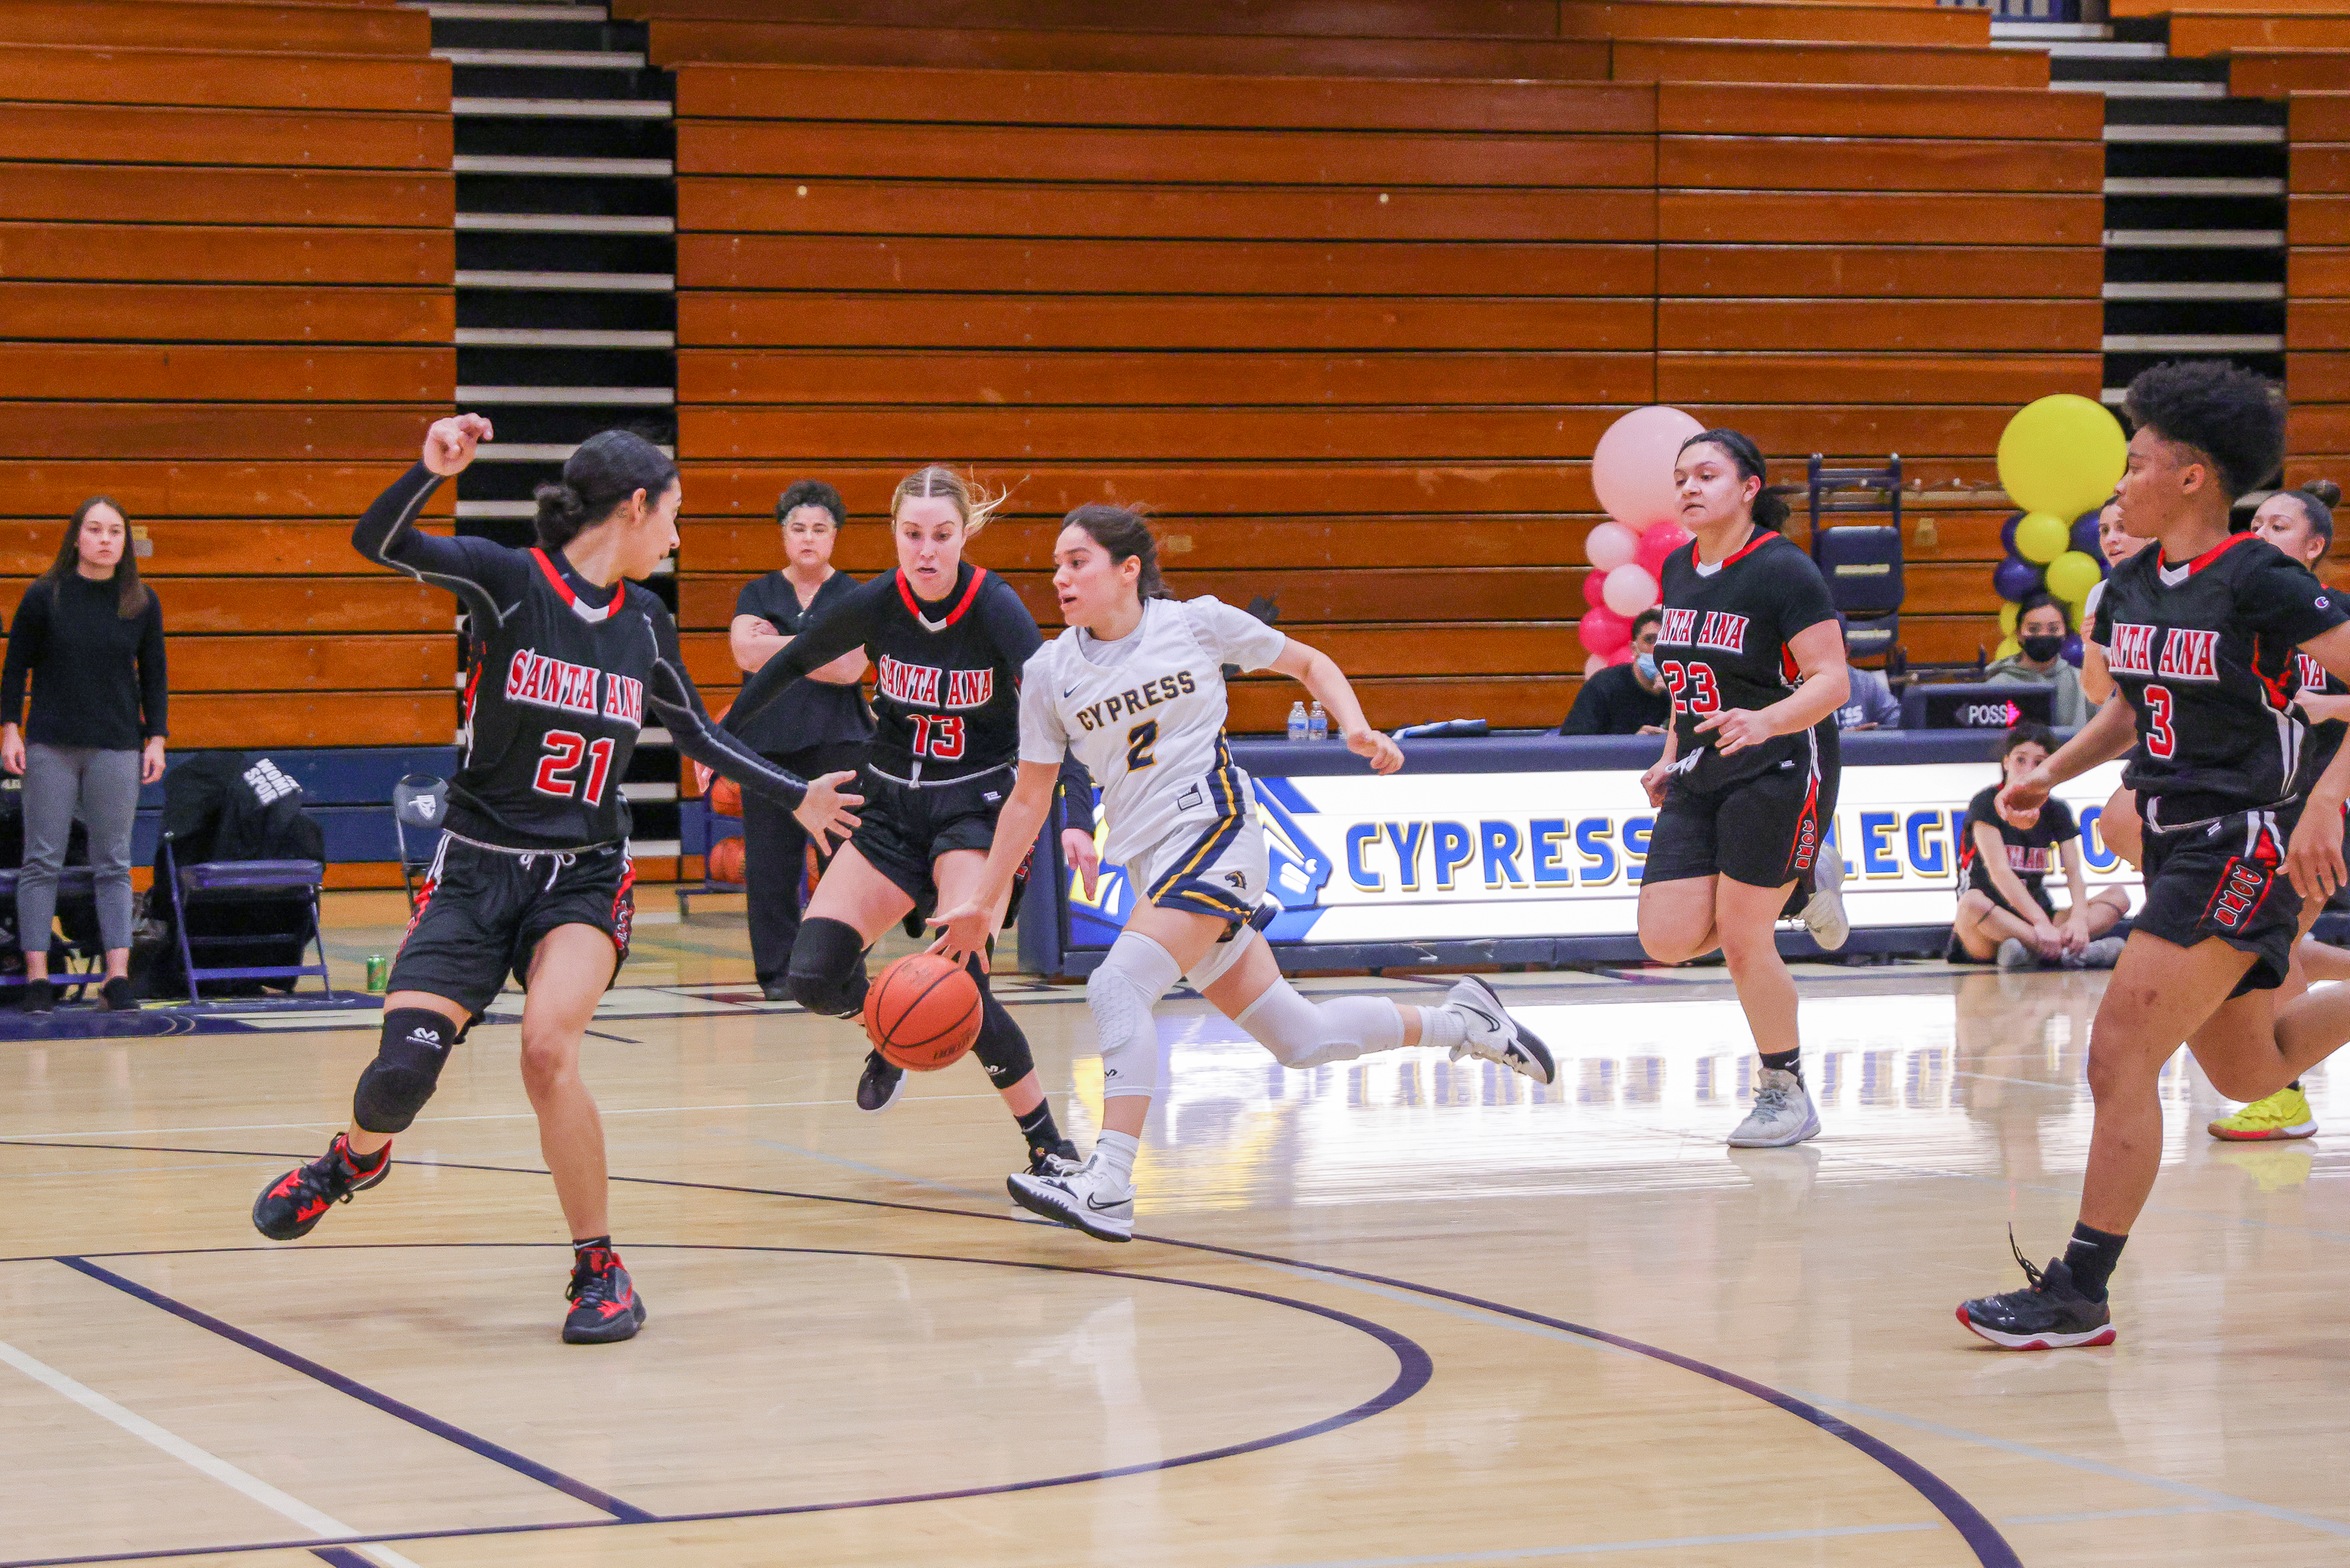 Cypress Women's Basketball Travels to Glendale College for Round 2 of the CCCAA Playoffs